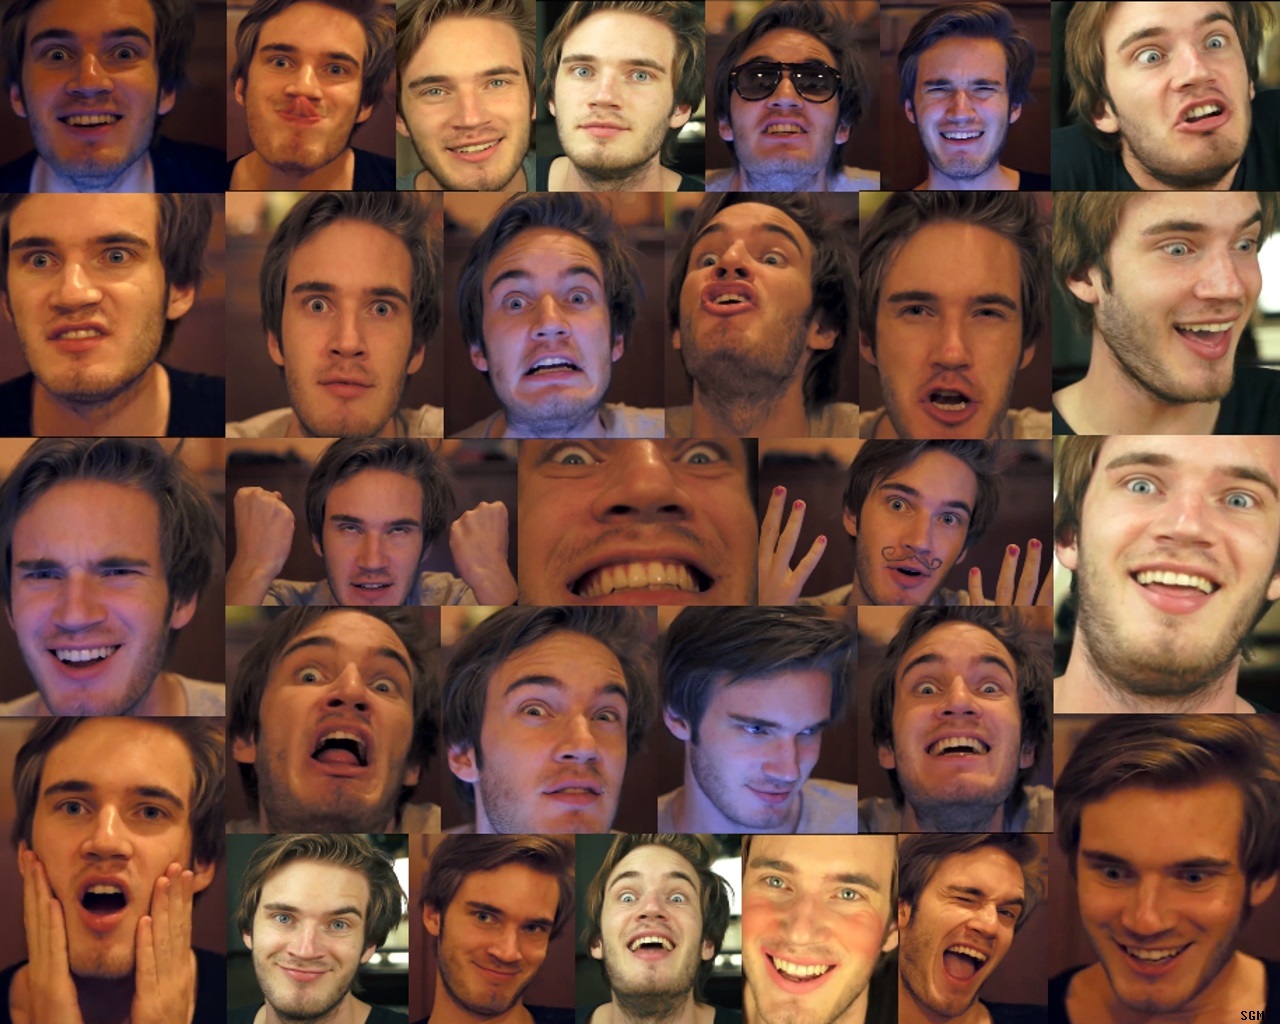 Pewdiepie(Another face gif) by 2Awesome4U2 on DeviantArt